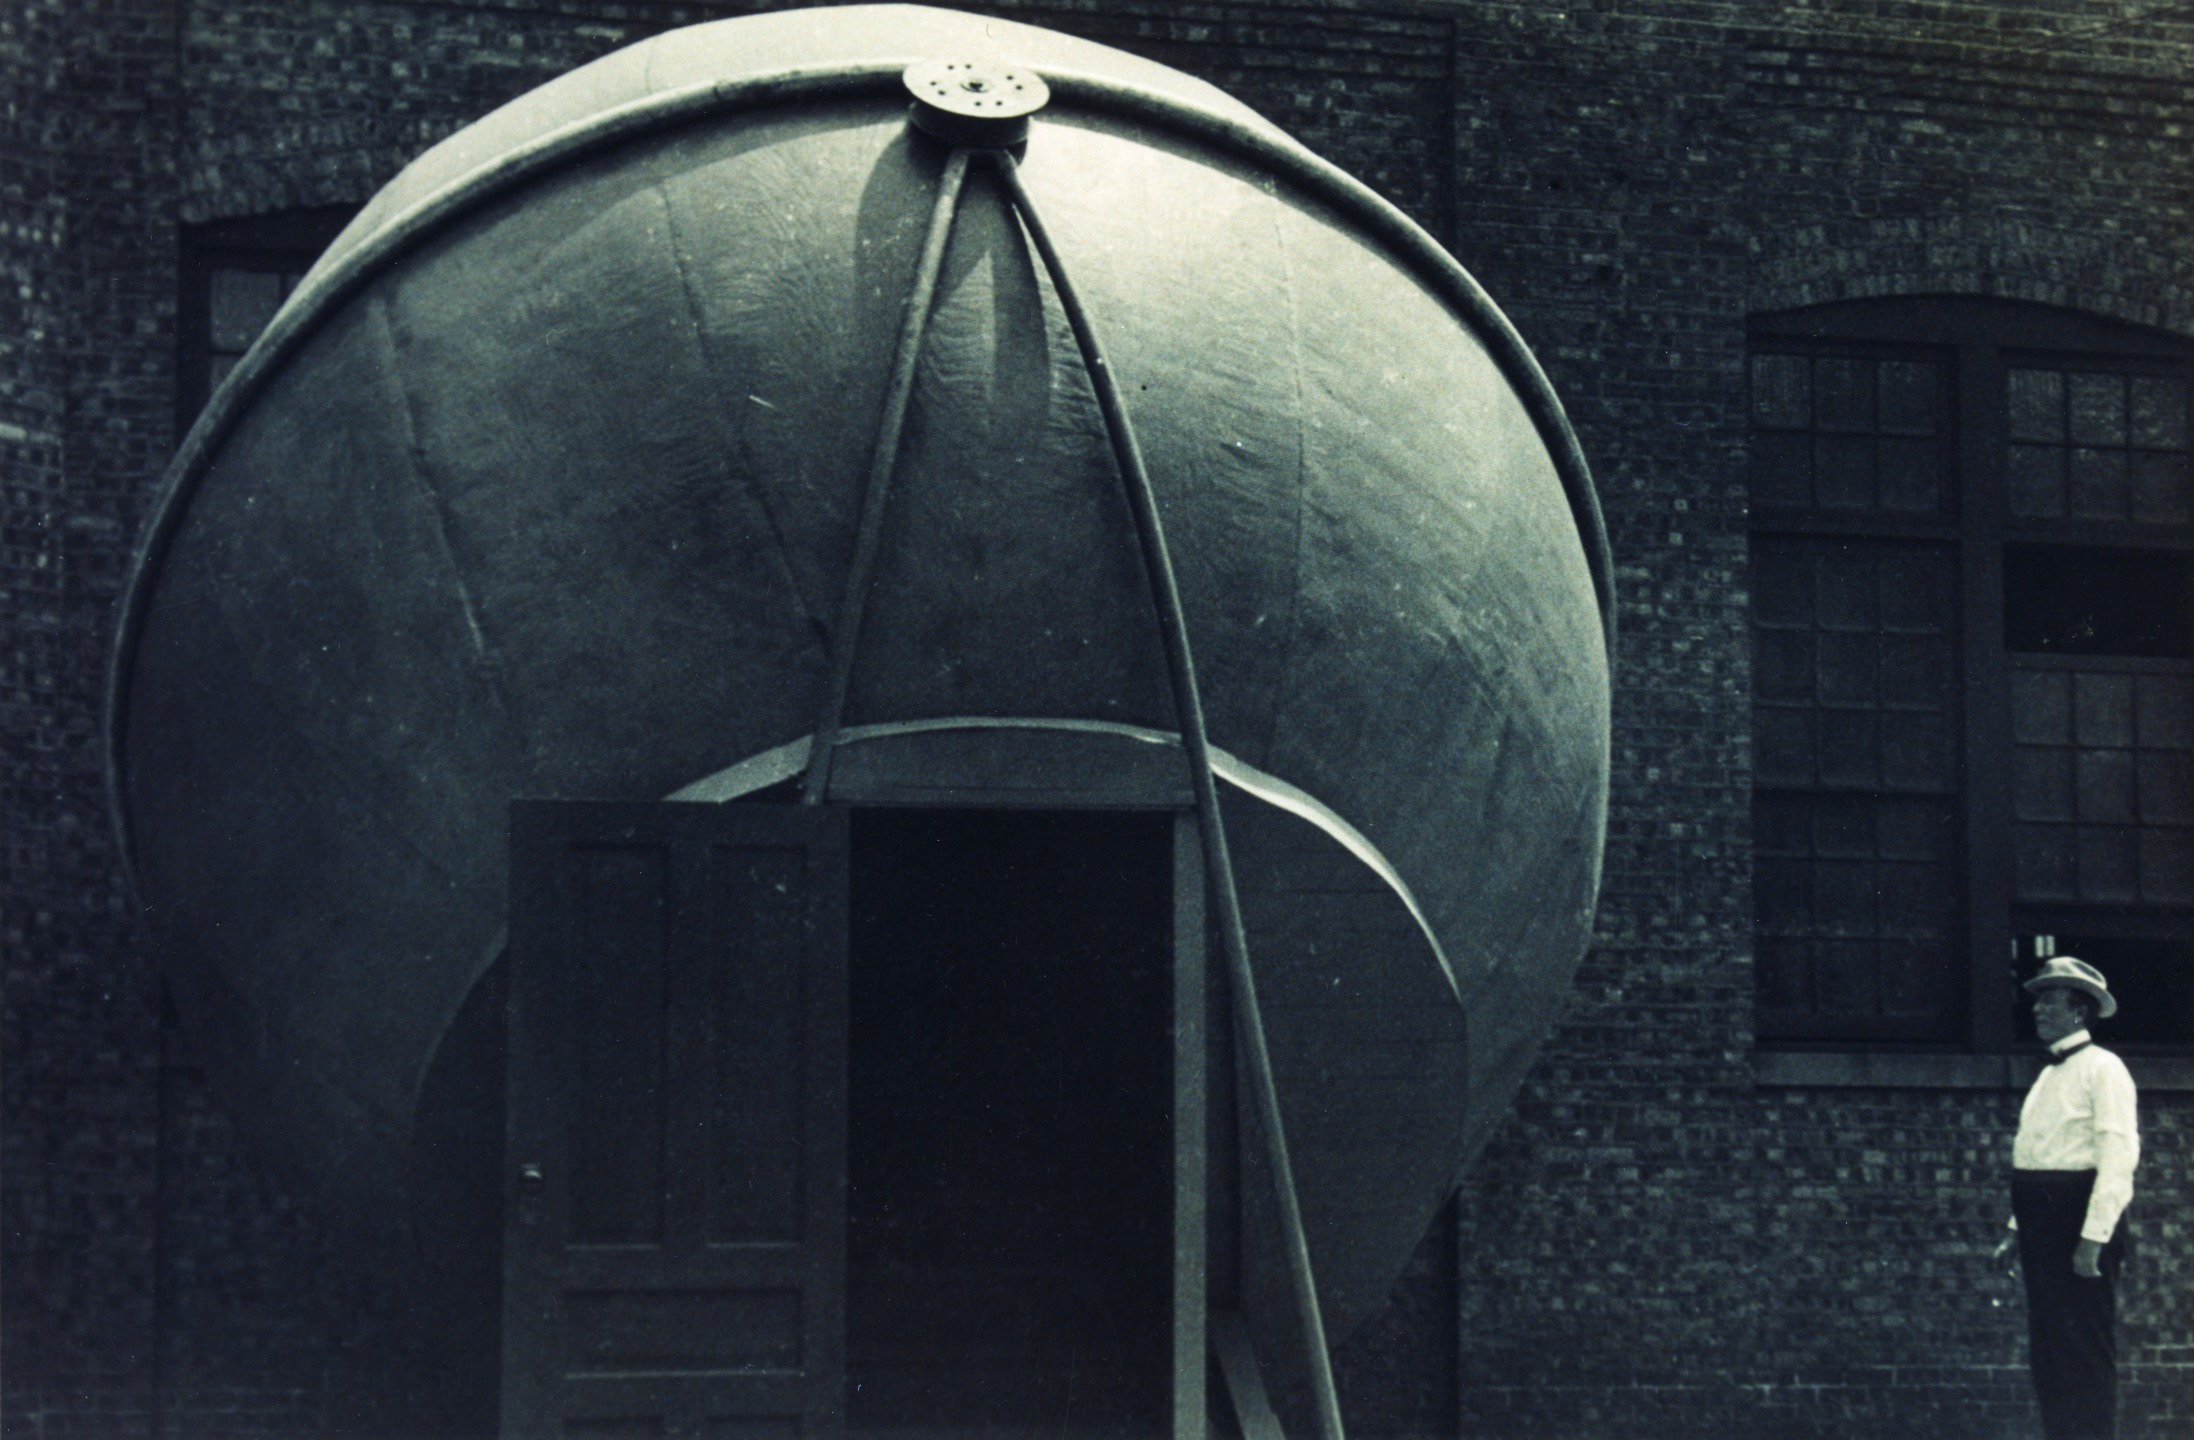  Image Caption: Outside a brick building the Atwood Sphere stands assembled with an open wooden door at the bottom. A man is standing to the right. c. 1913 Image Credit: Adler Planetarium Archives